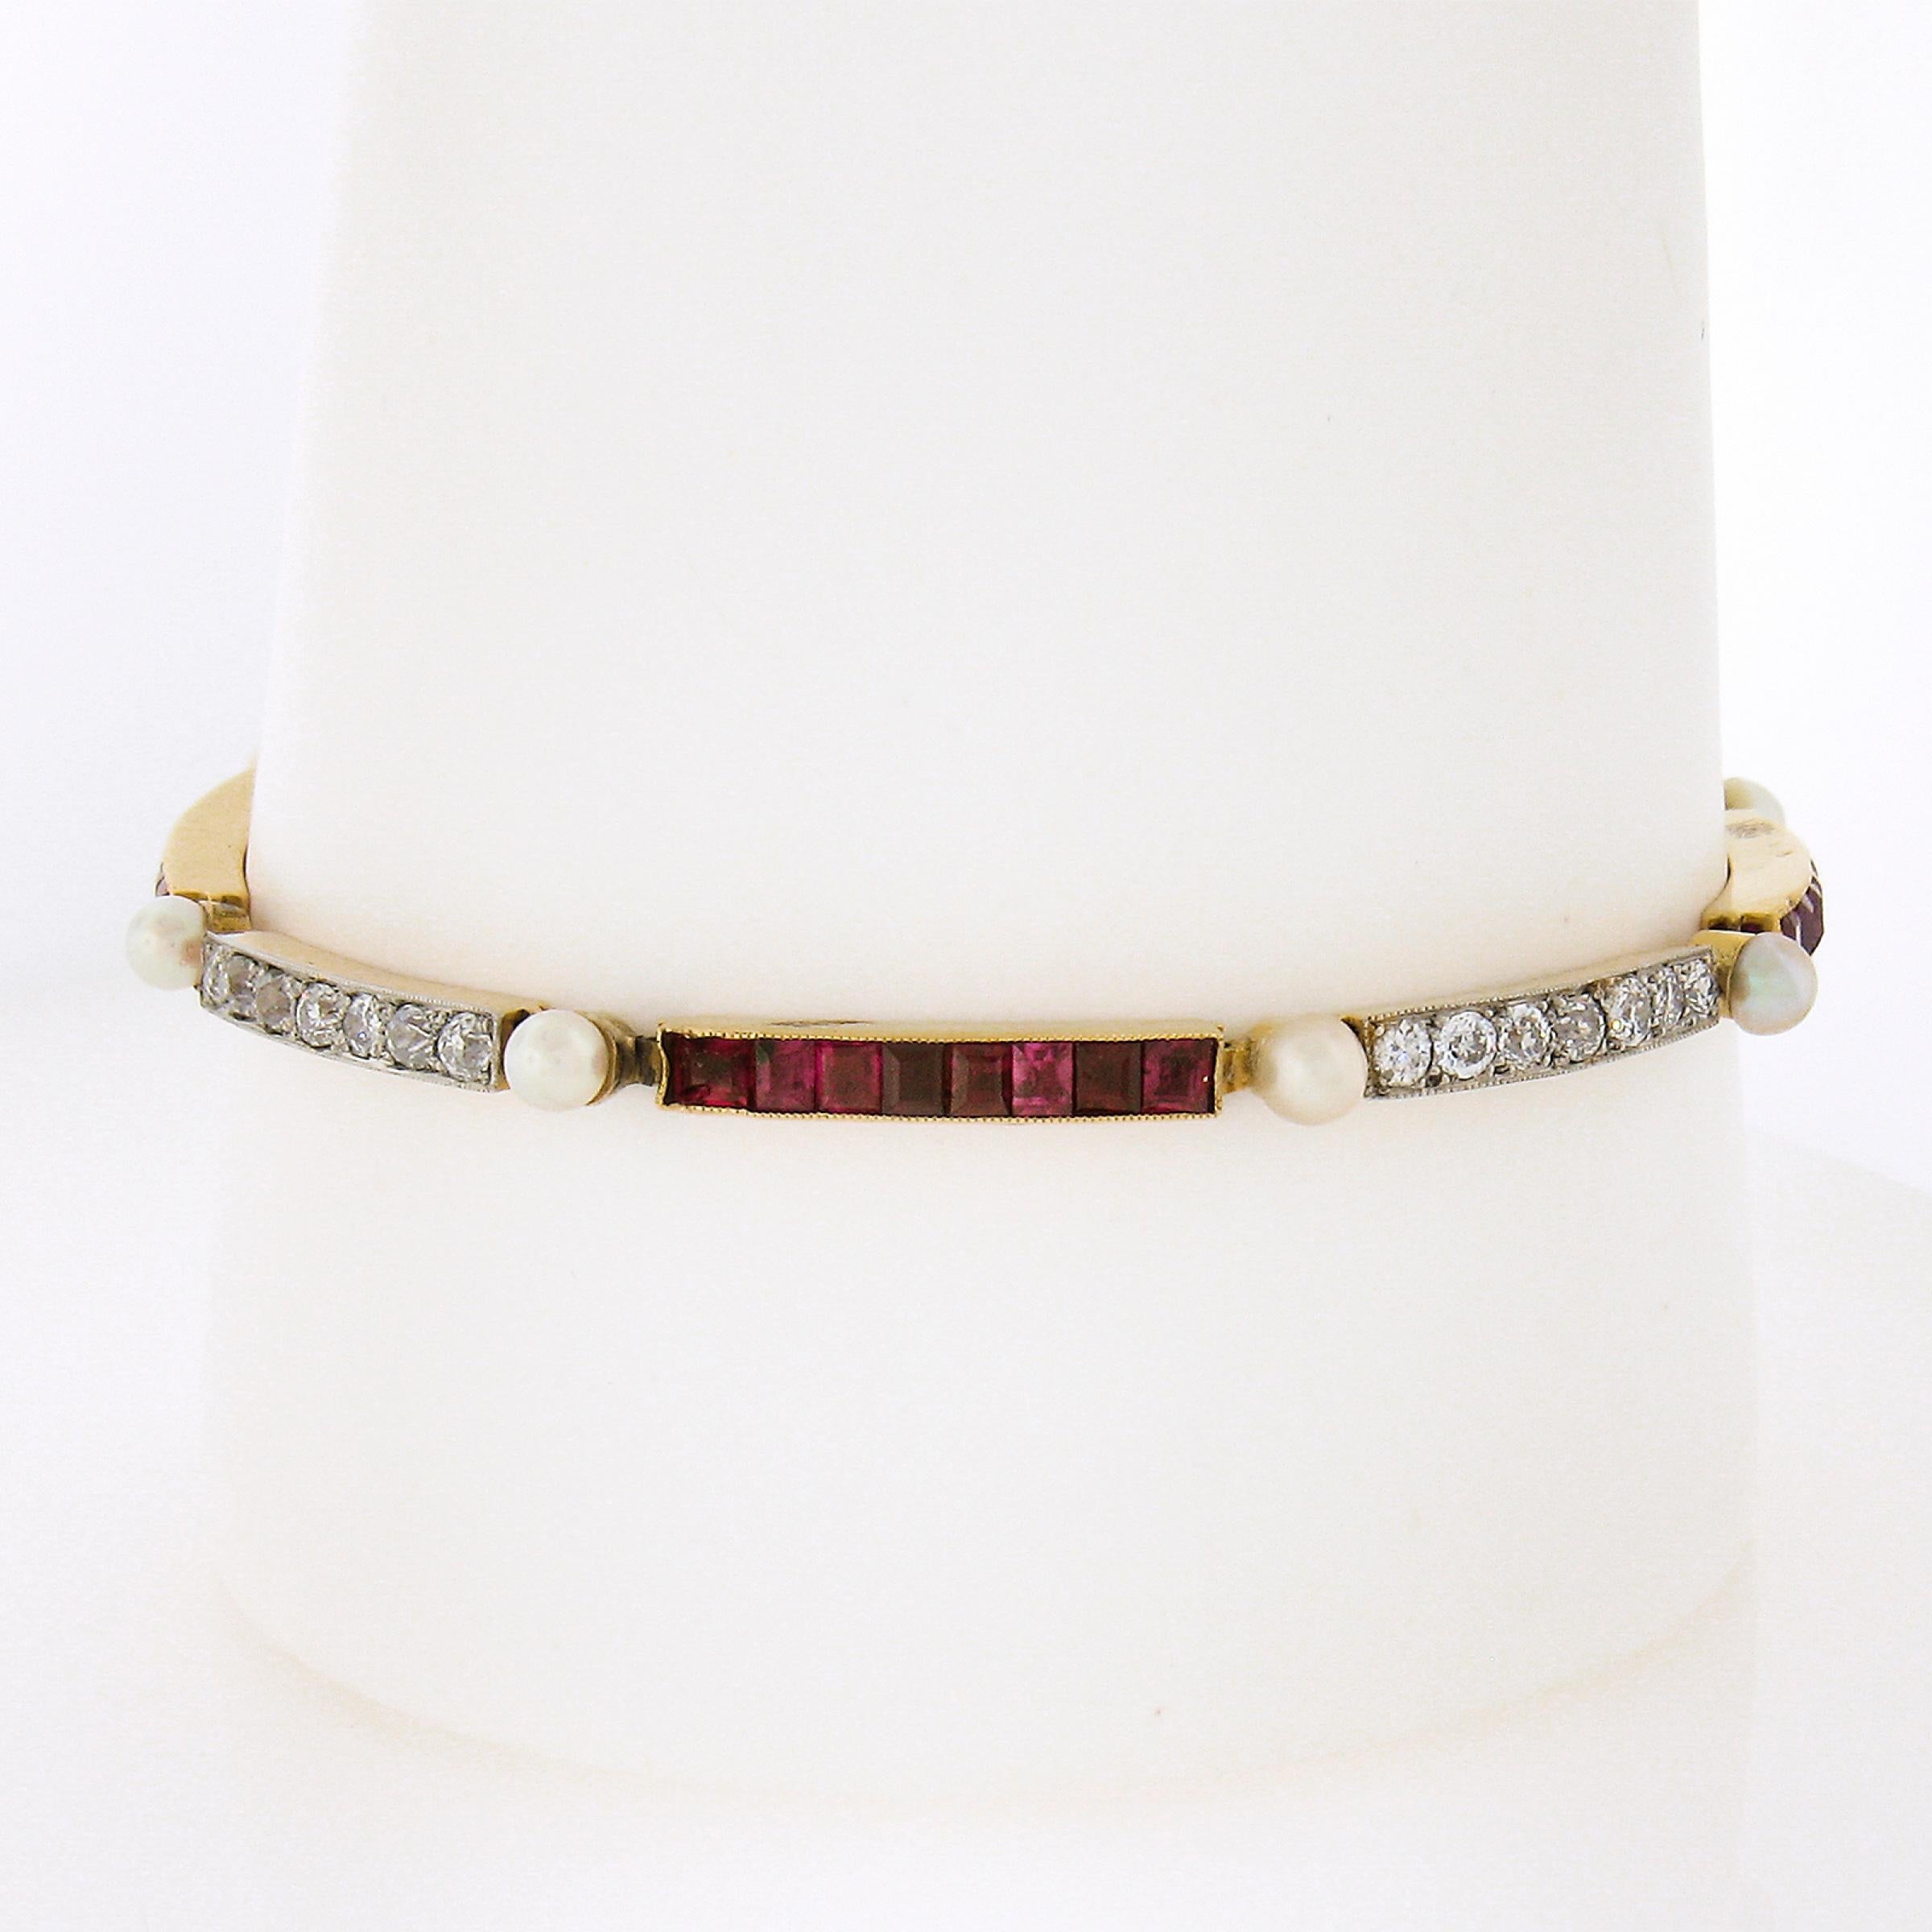 Very nice genuine Edwardain bracelet - amazing old cut diamonds and square NO HEAT Burma rubies! A special piece that remains in excellent condition! Enjoy! Comes with the GIA certification for the rubies.

--Stone(s):--
(28) Natural Genuine